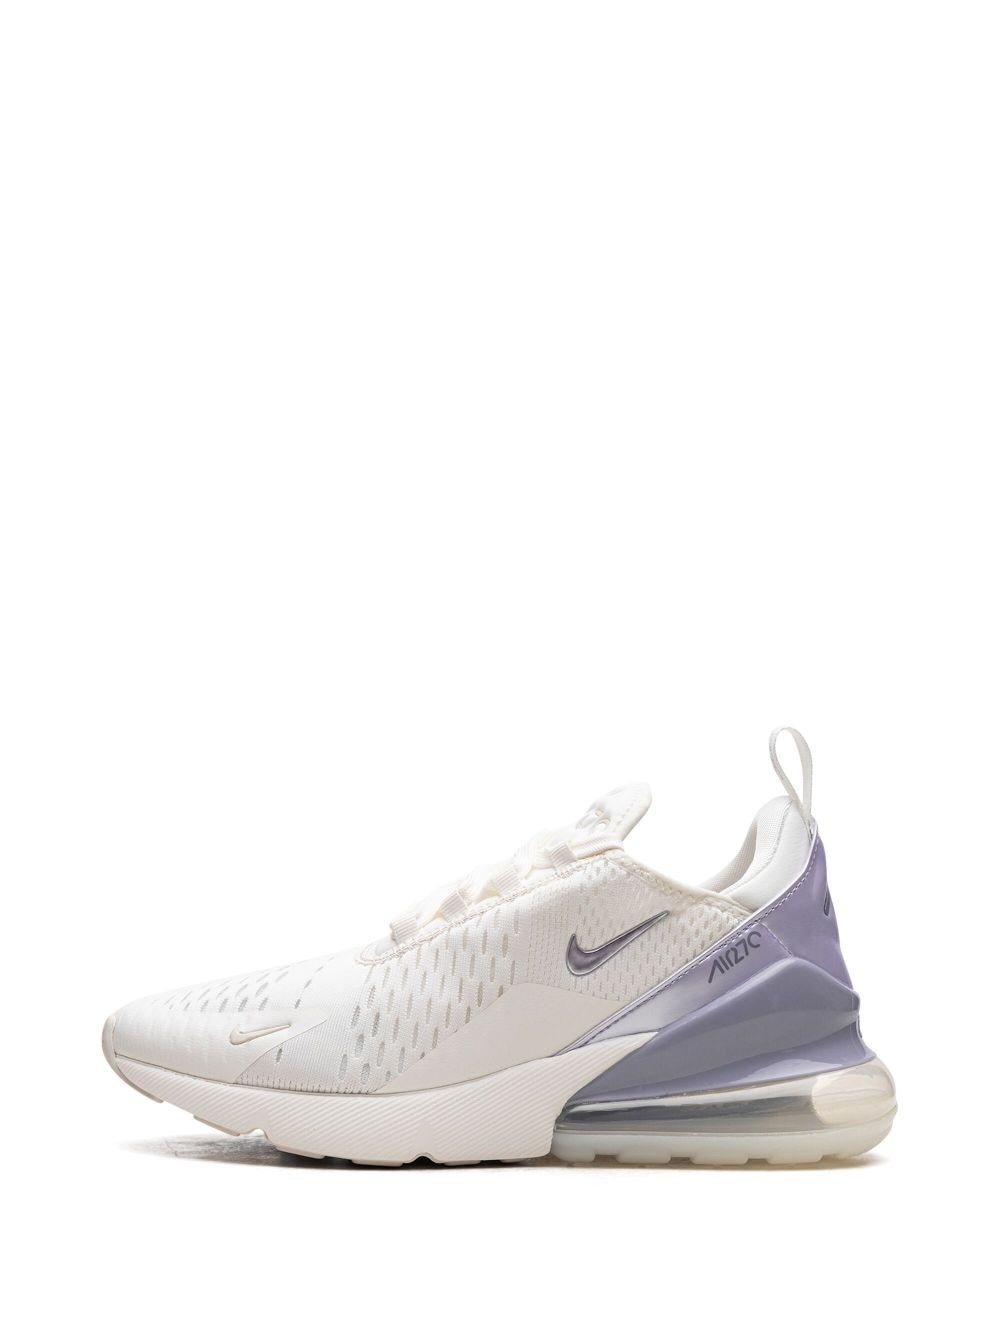 Air Max 270 "Oxygen Purple" sneakers - 7